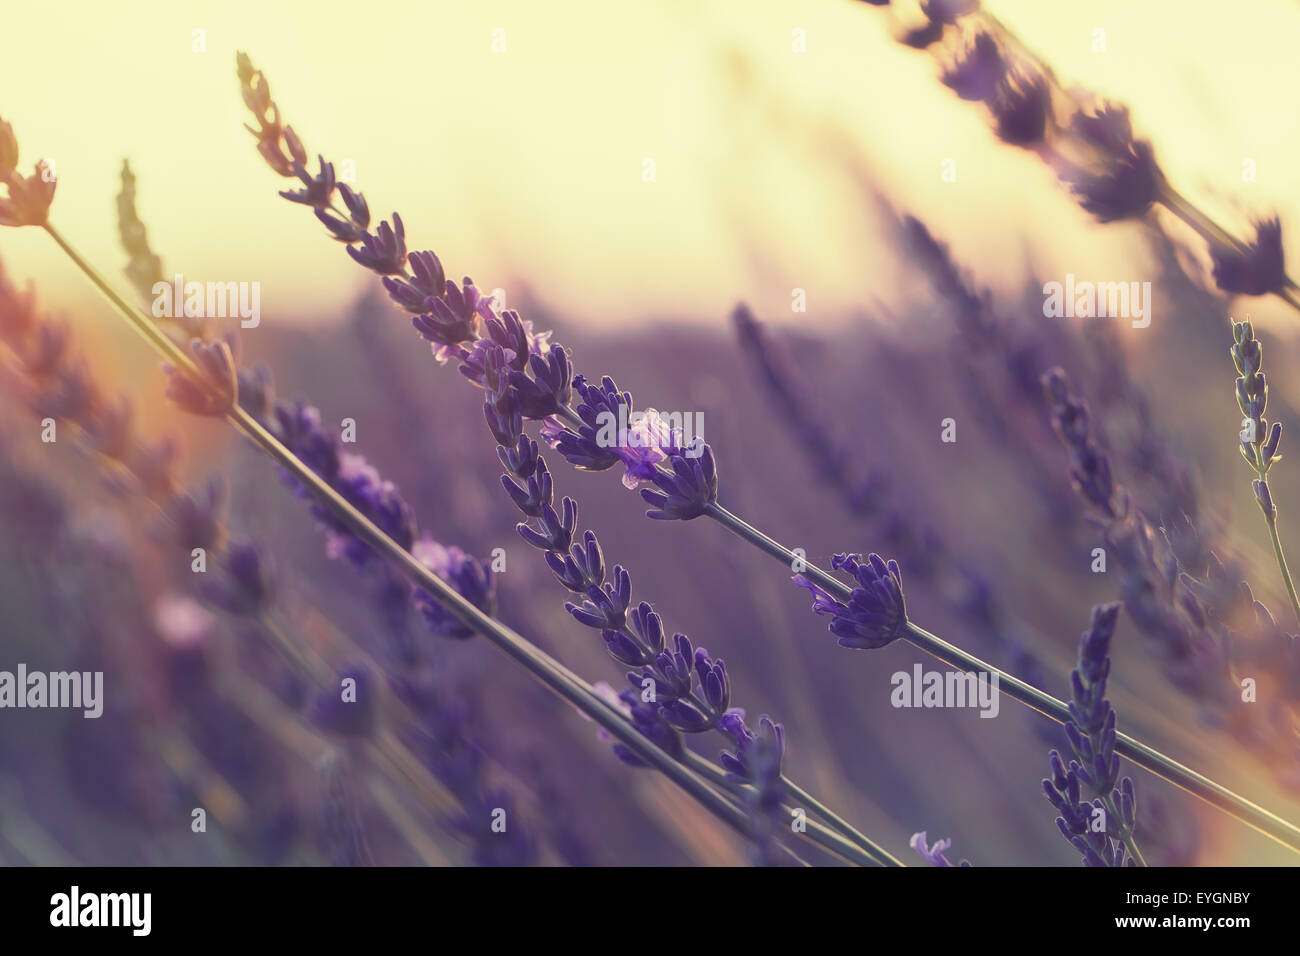 Lavender blossoms. A macro photograph with shallow depth of field. Done with vintage retro filter Stock Photo